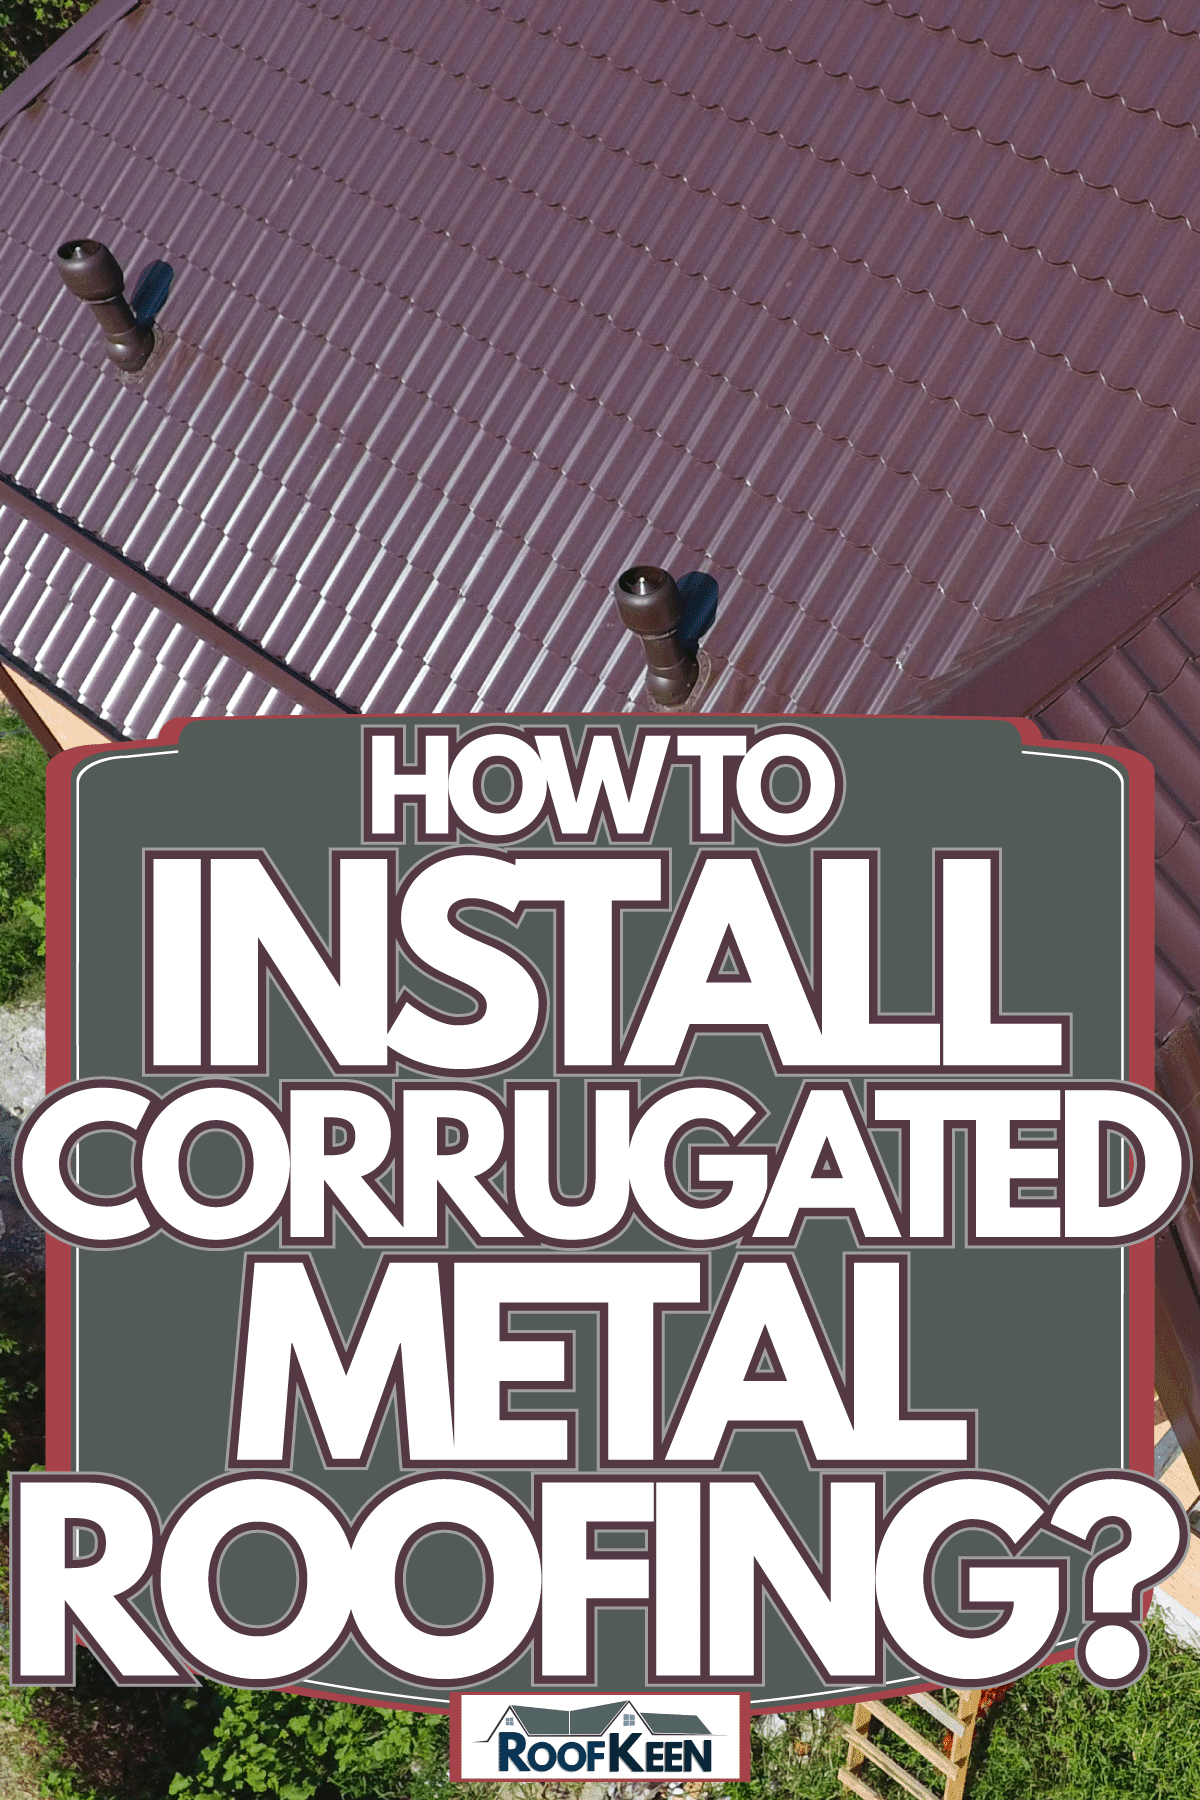 Roof top metal in a beautiful modern house, How To install Corrugated Metal Roofing?